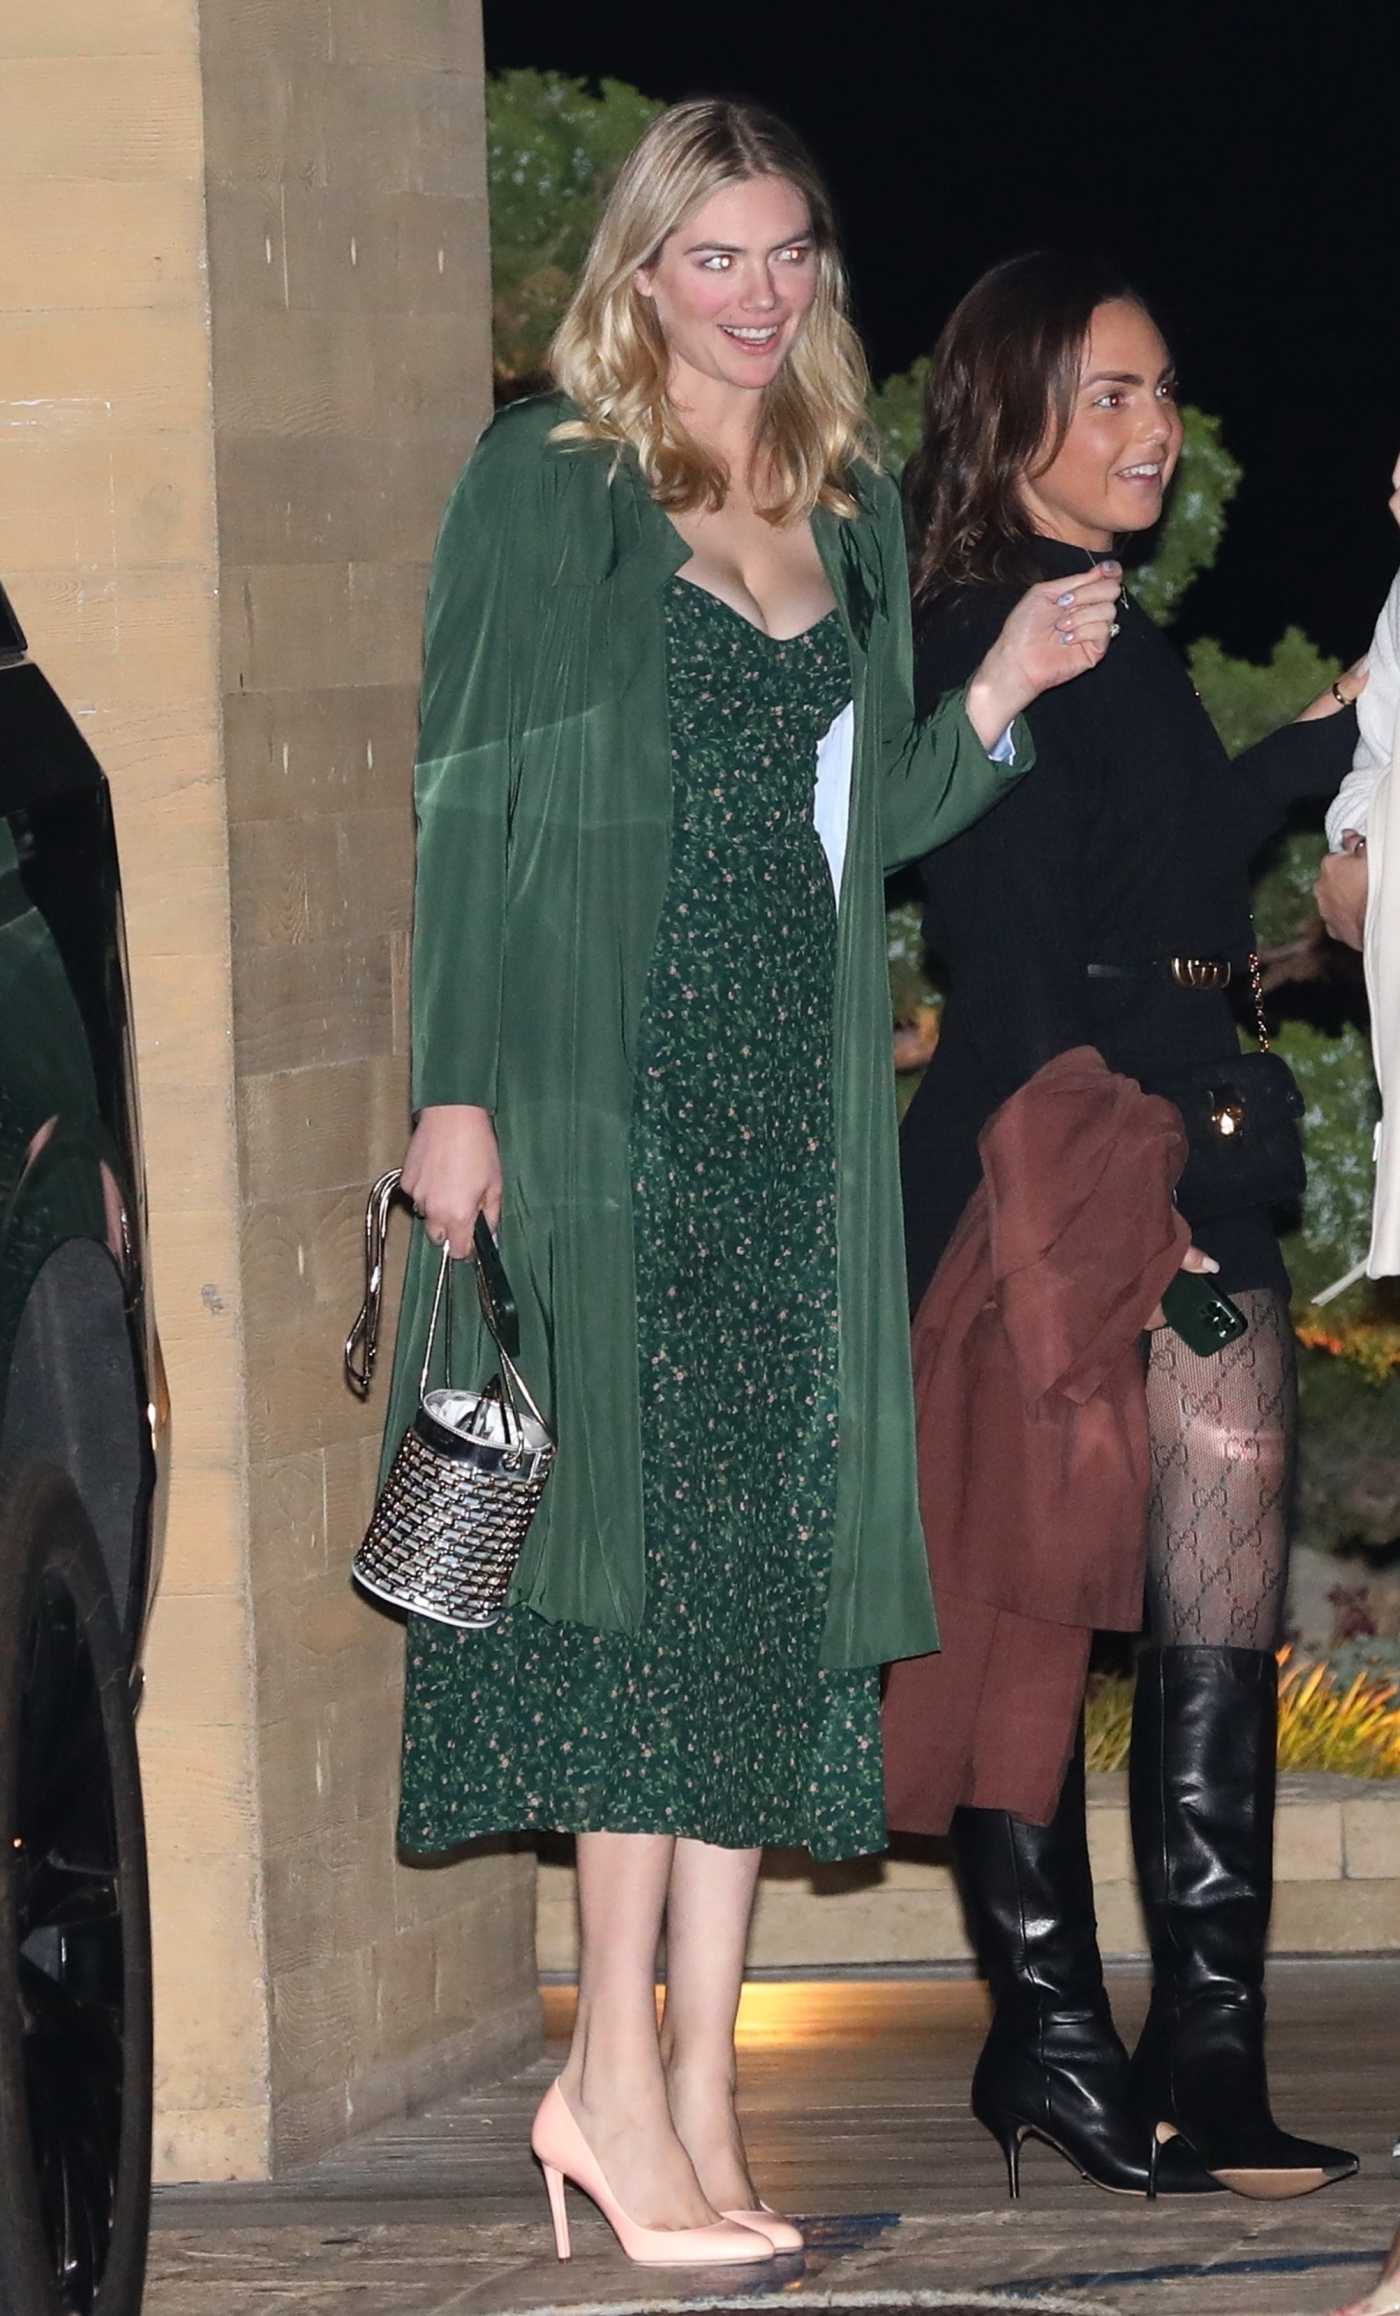 Kate Upton in a Green Floral Dress Leaves Nobu Restaurant After Having Dinner with Friends in Malibu 04/19/2022